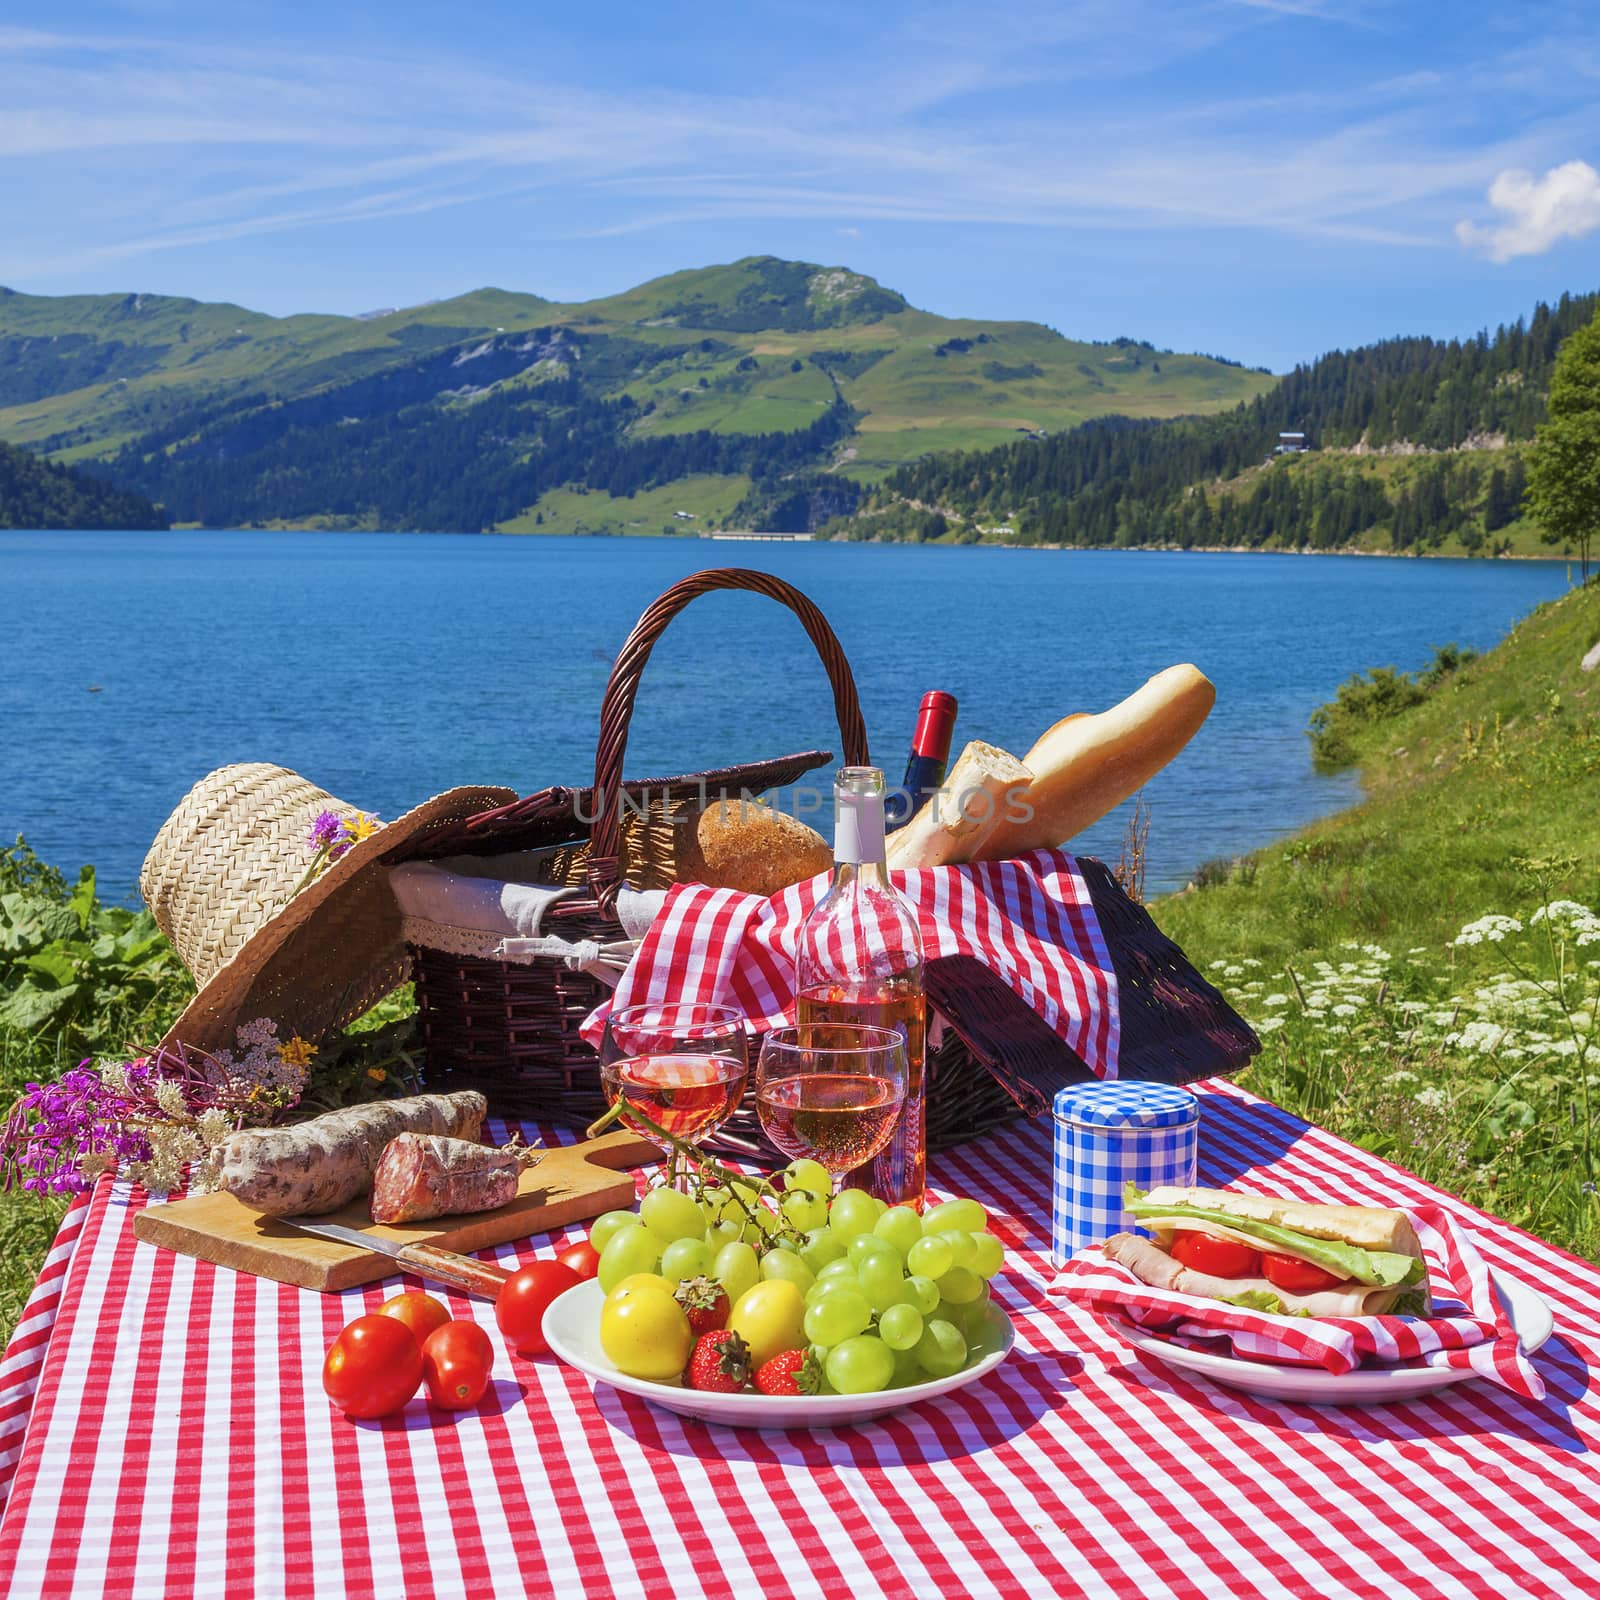 Picnic in alpine mountains by vwalakte